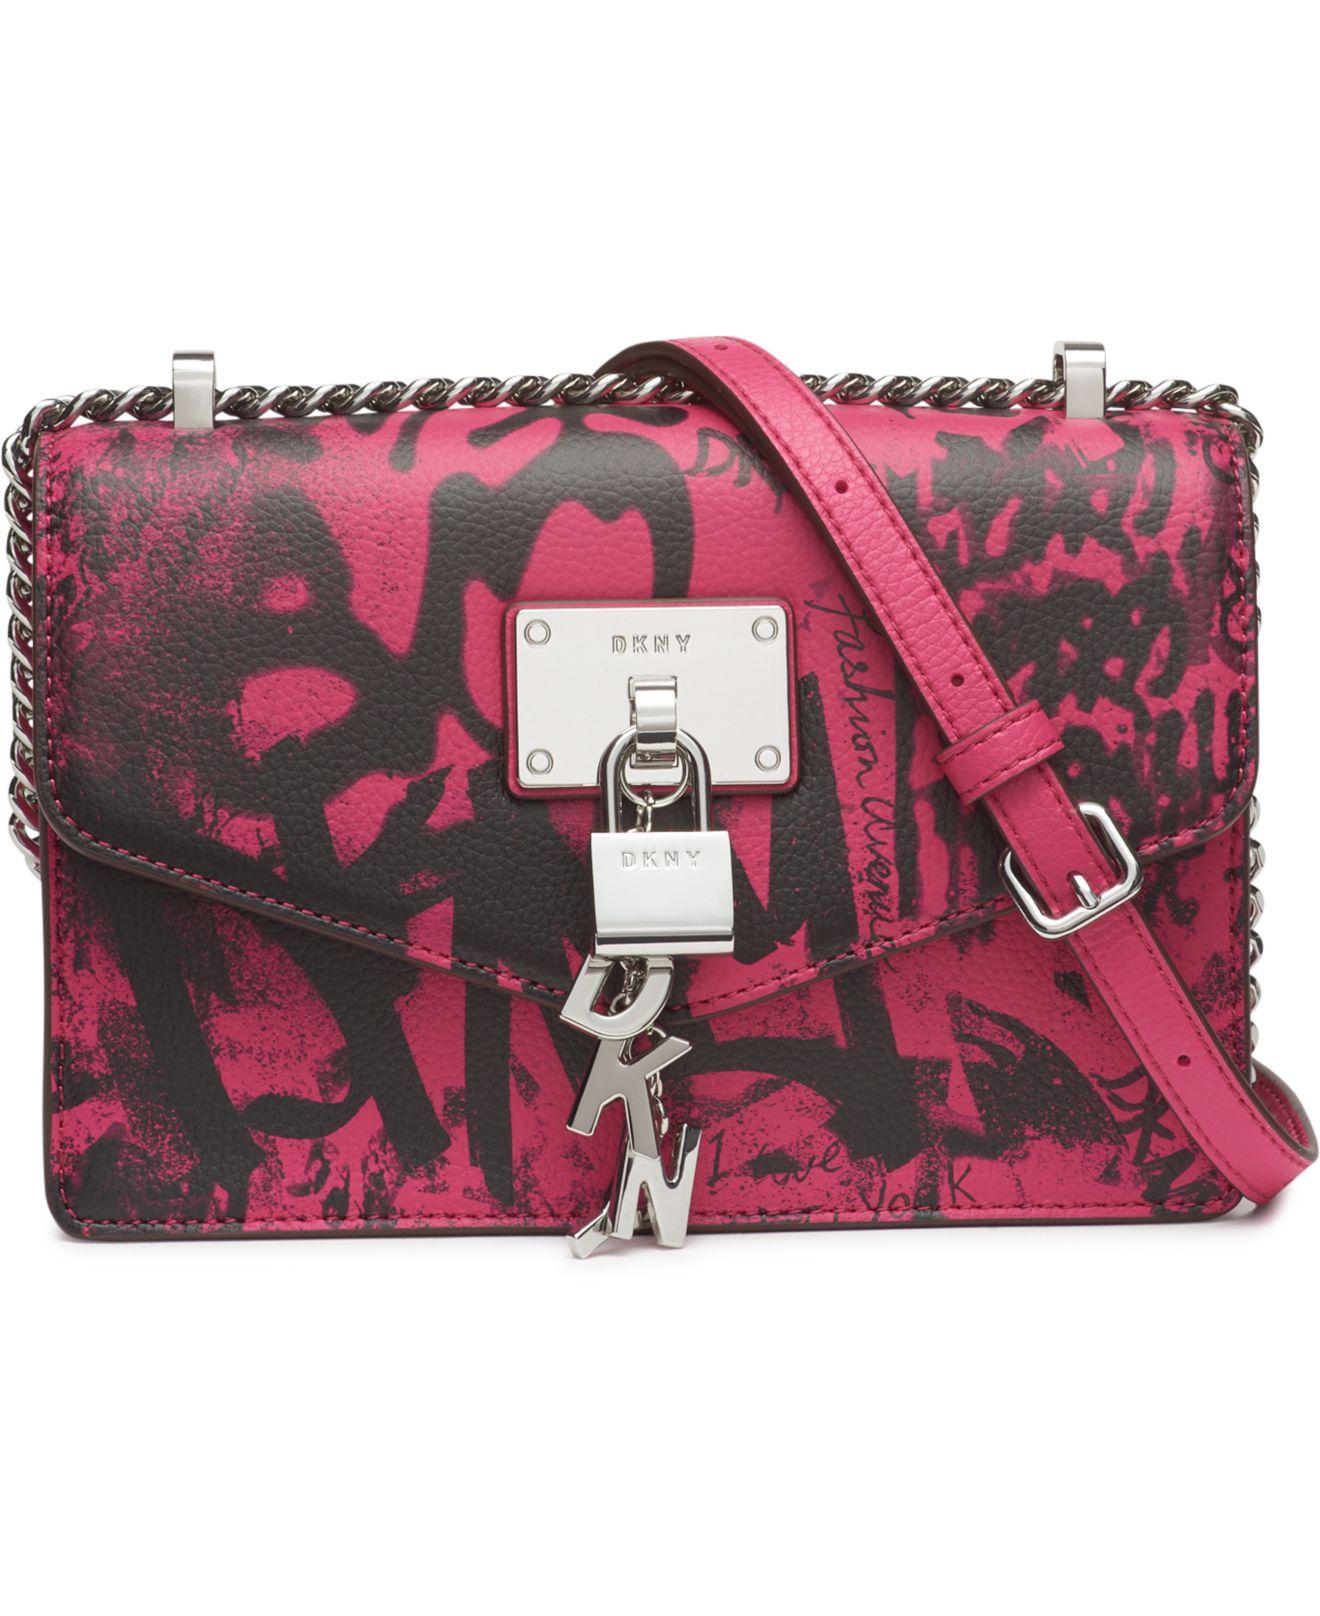 DKNY Elissa Graffiti Logo Leather Shoulder Bag, Created For Macy's in Pink